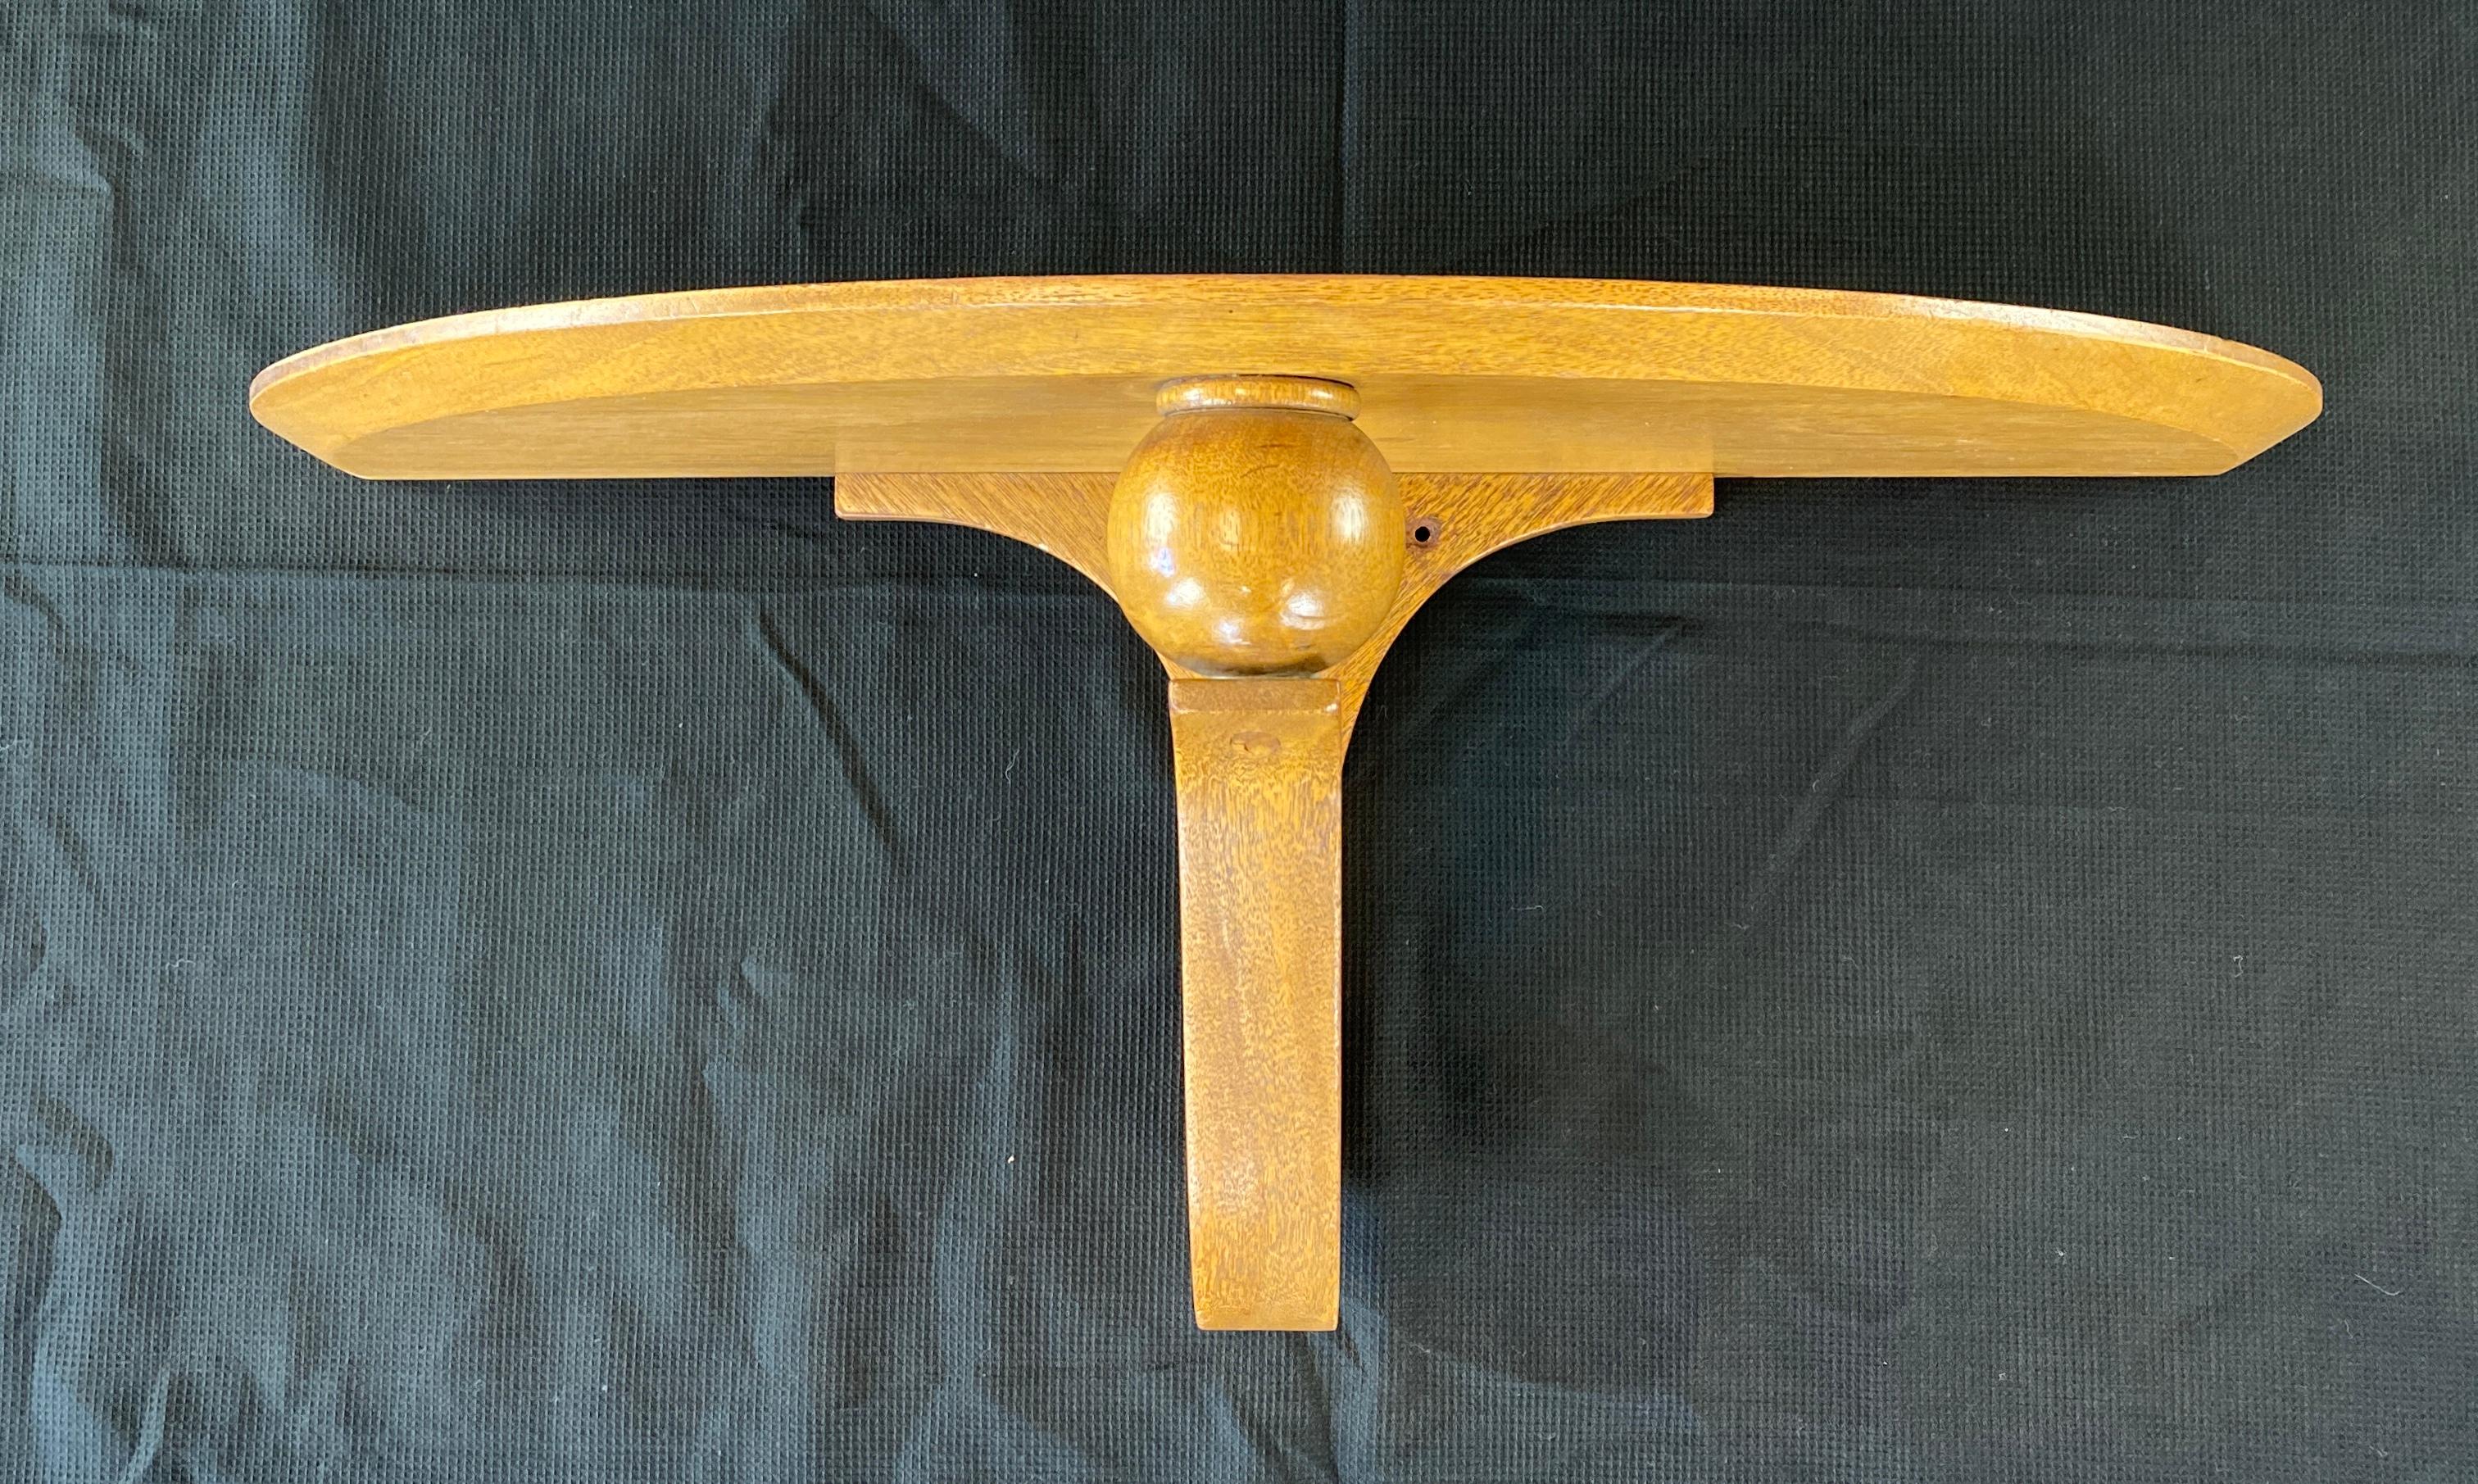 A floating demilune wall shelf by Edward Wormley for Dunbar circa 1950s.
Not sure of the type of wood, thinking it's fruitwood or pecan.